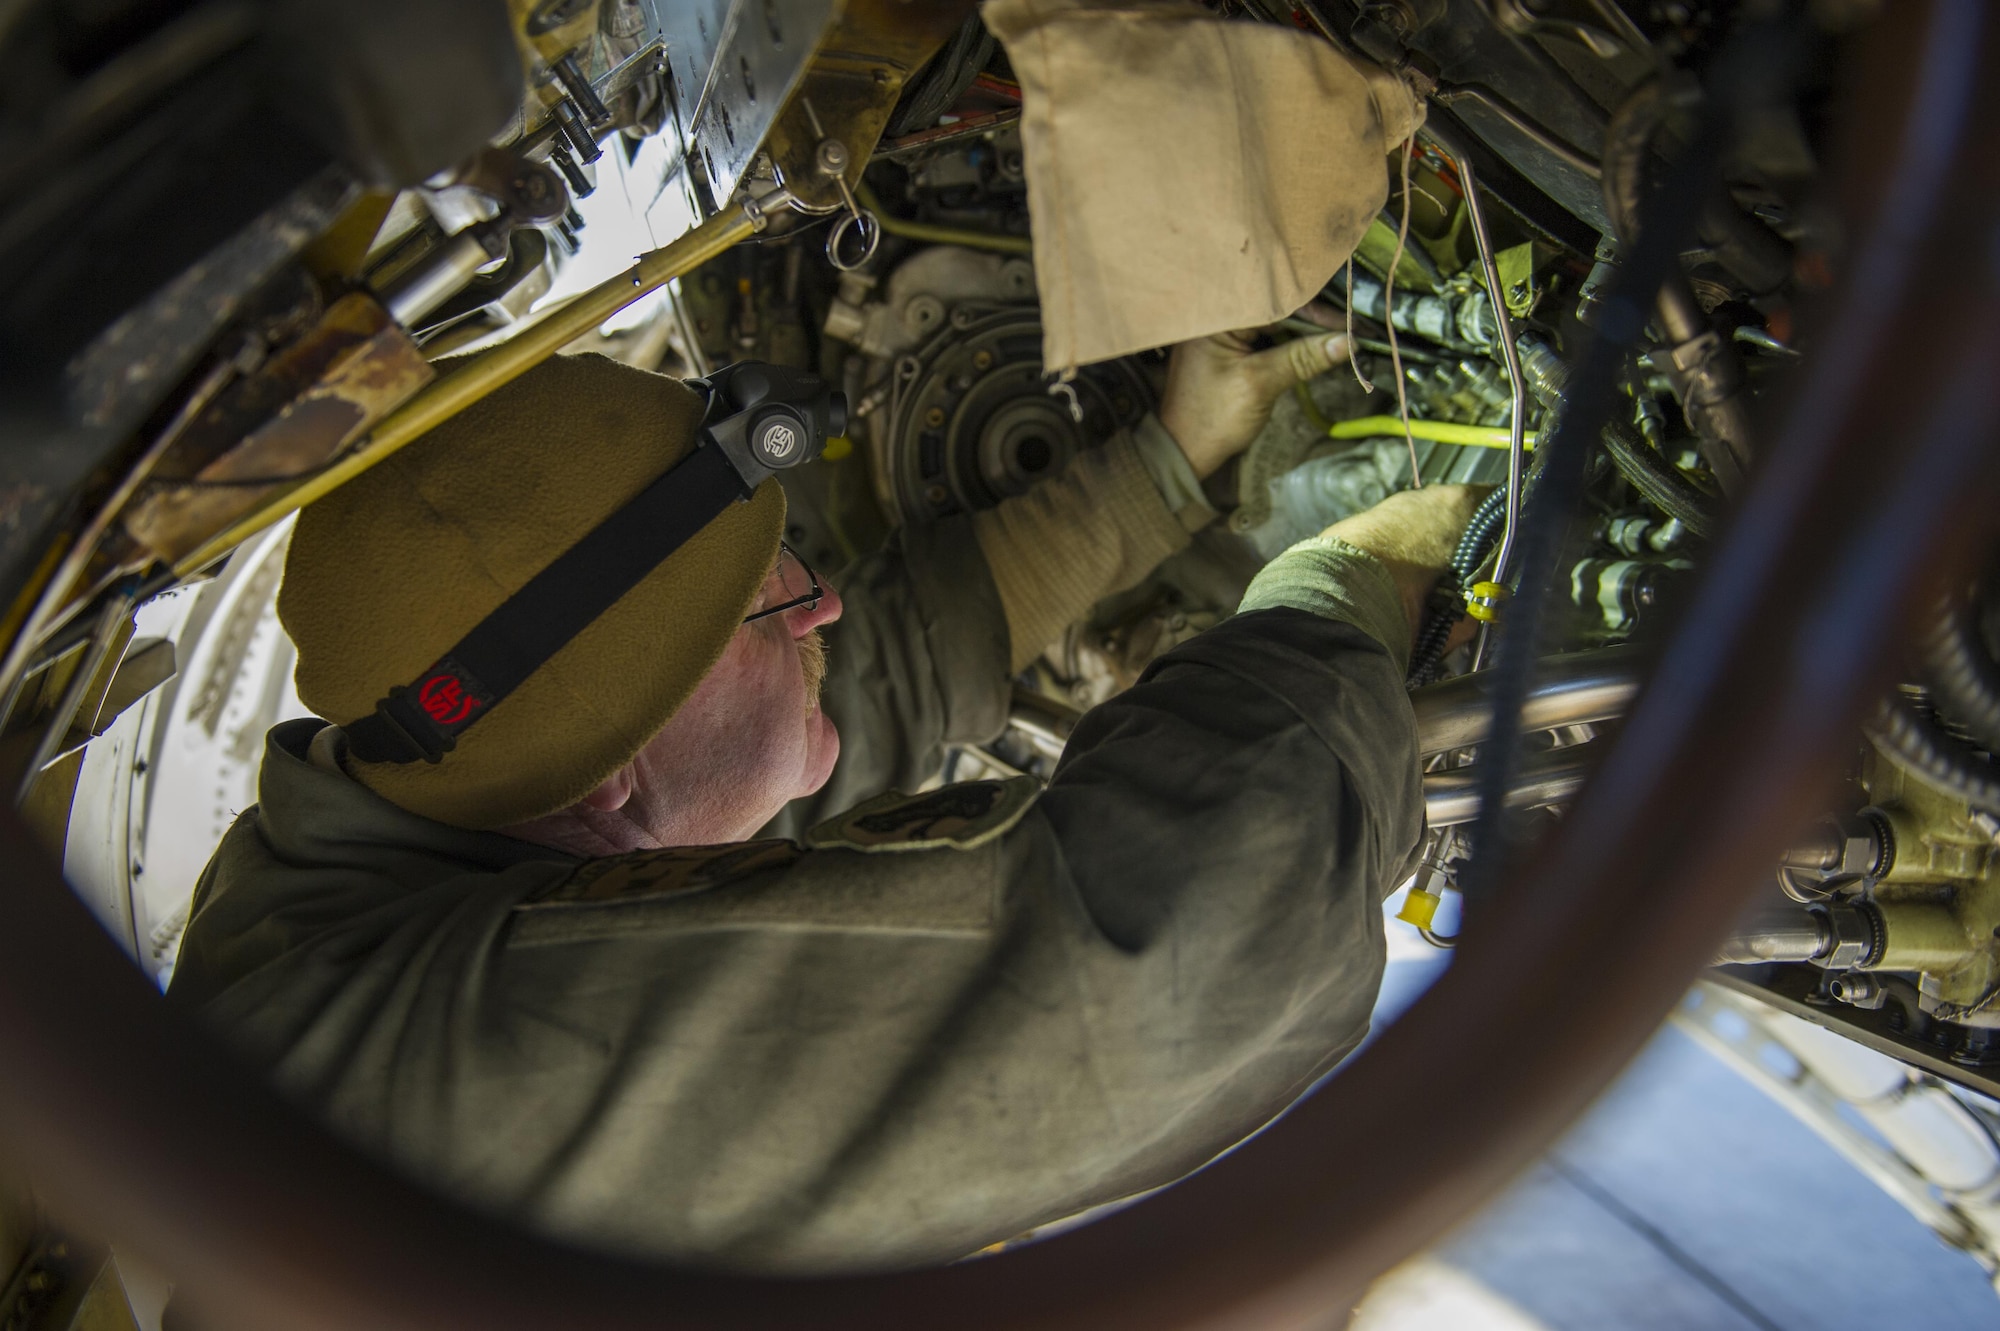 Master Sgt. Jim Anderson, 455th Expeditionary Aircraft Maintenance Squadron, deployed from Hill Air Force Base, Utah, removes and replaces a jet fuel starter on an F-16 Fighting Falcon at Bagram Airfield, Afghanistan, Jan. 8, 2016. The 455th EAMXS provides combat-ready aircraft to the air component commander in support of coalition forces throughout Afghanistan.  (U.S. Air Force photo/Tech. Sgt. Robert Cloys)